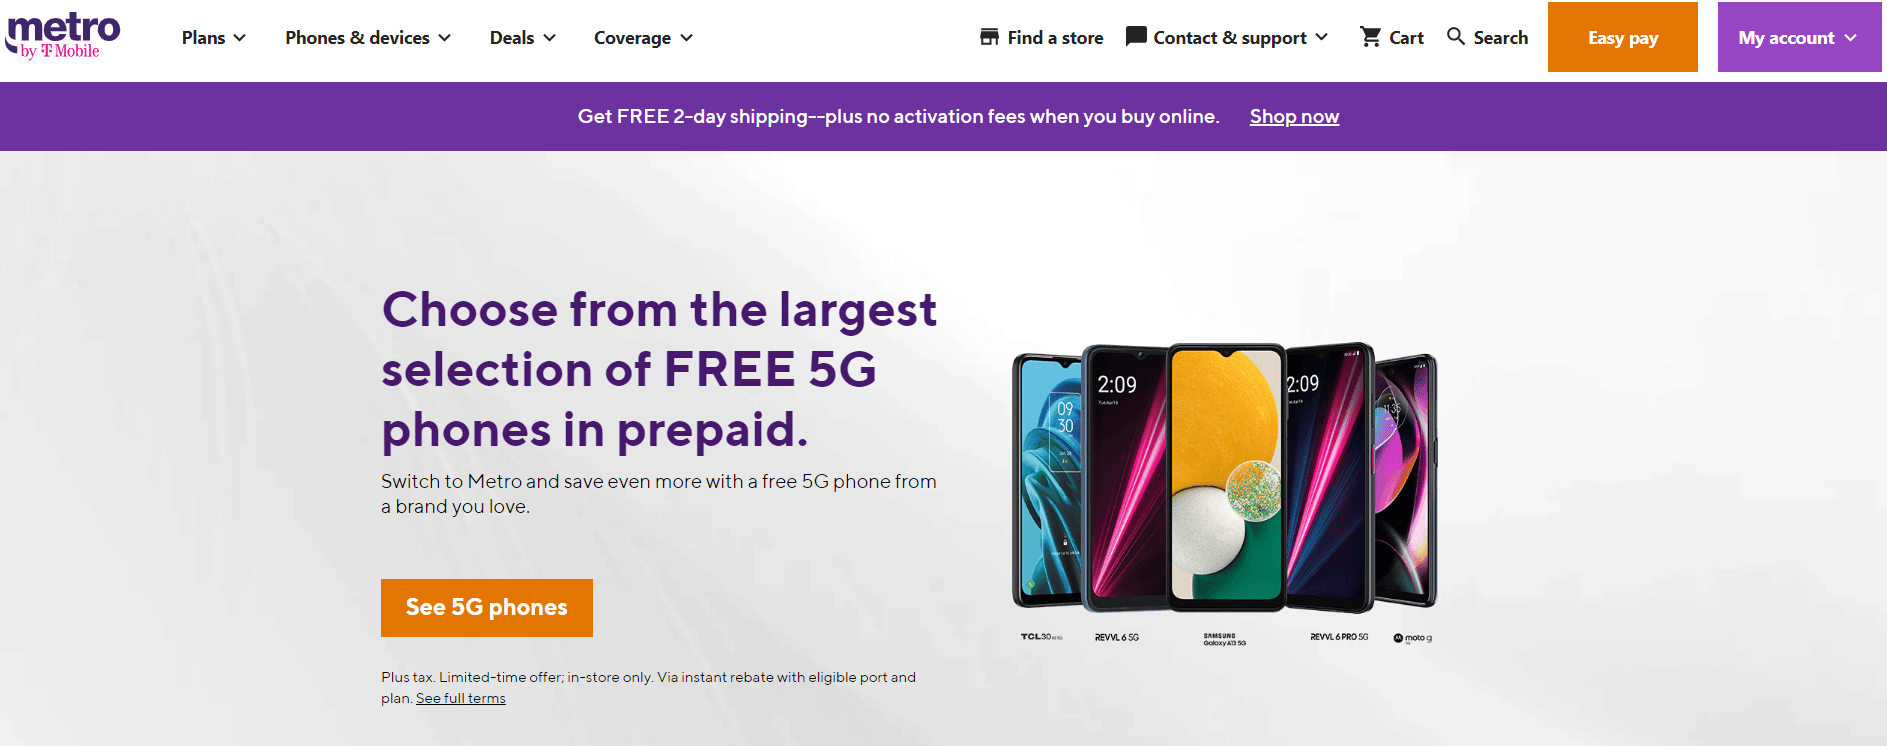 Metro by T-Mobile website